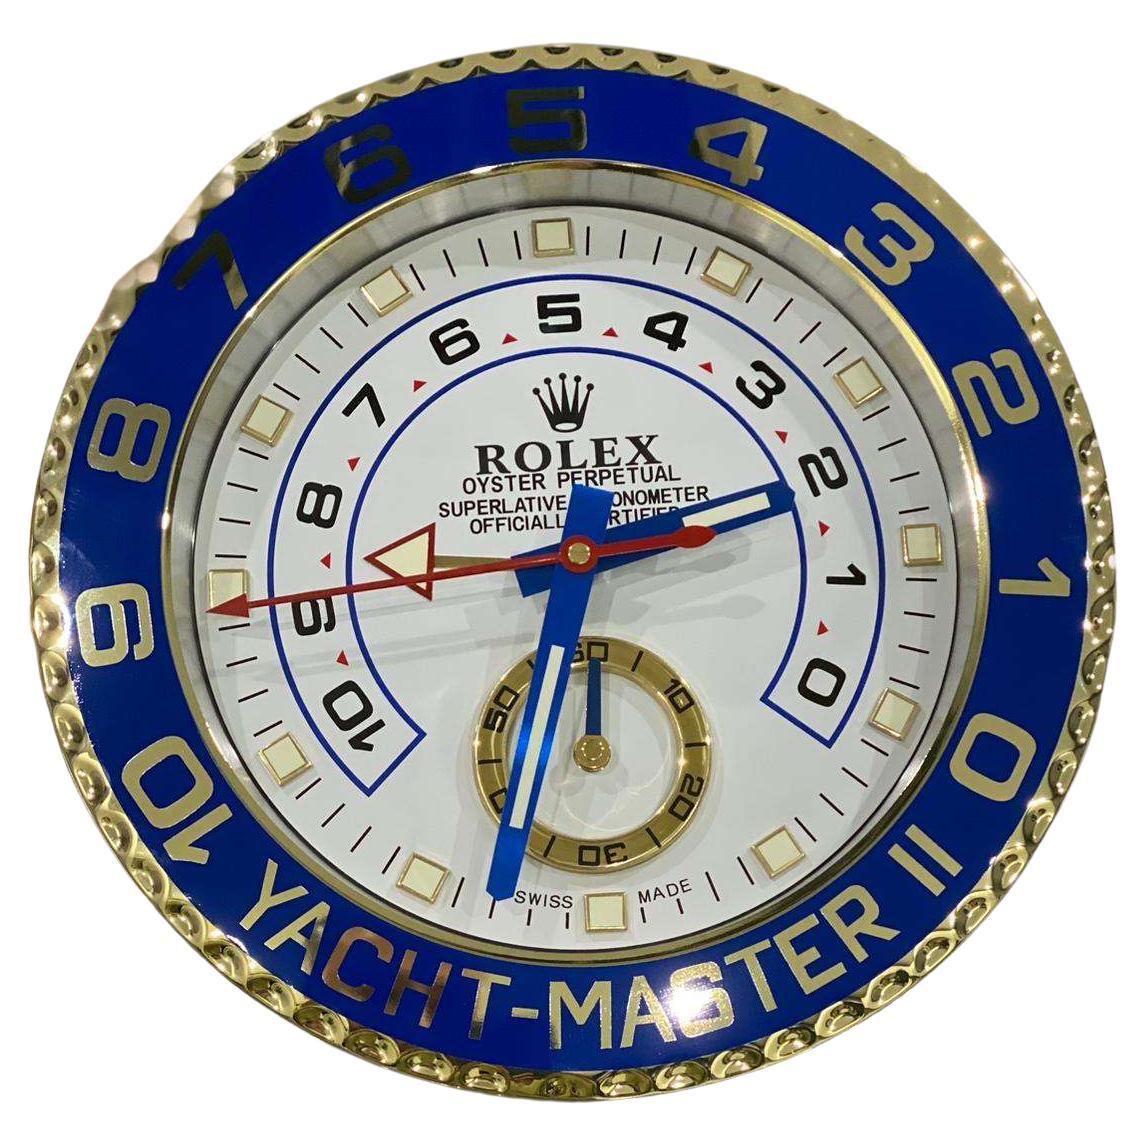 ROLEX Officially Certified Chrome Gold and Blue Yacht Master II Wall Clock For Sale